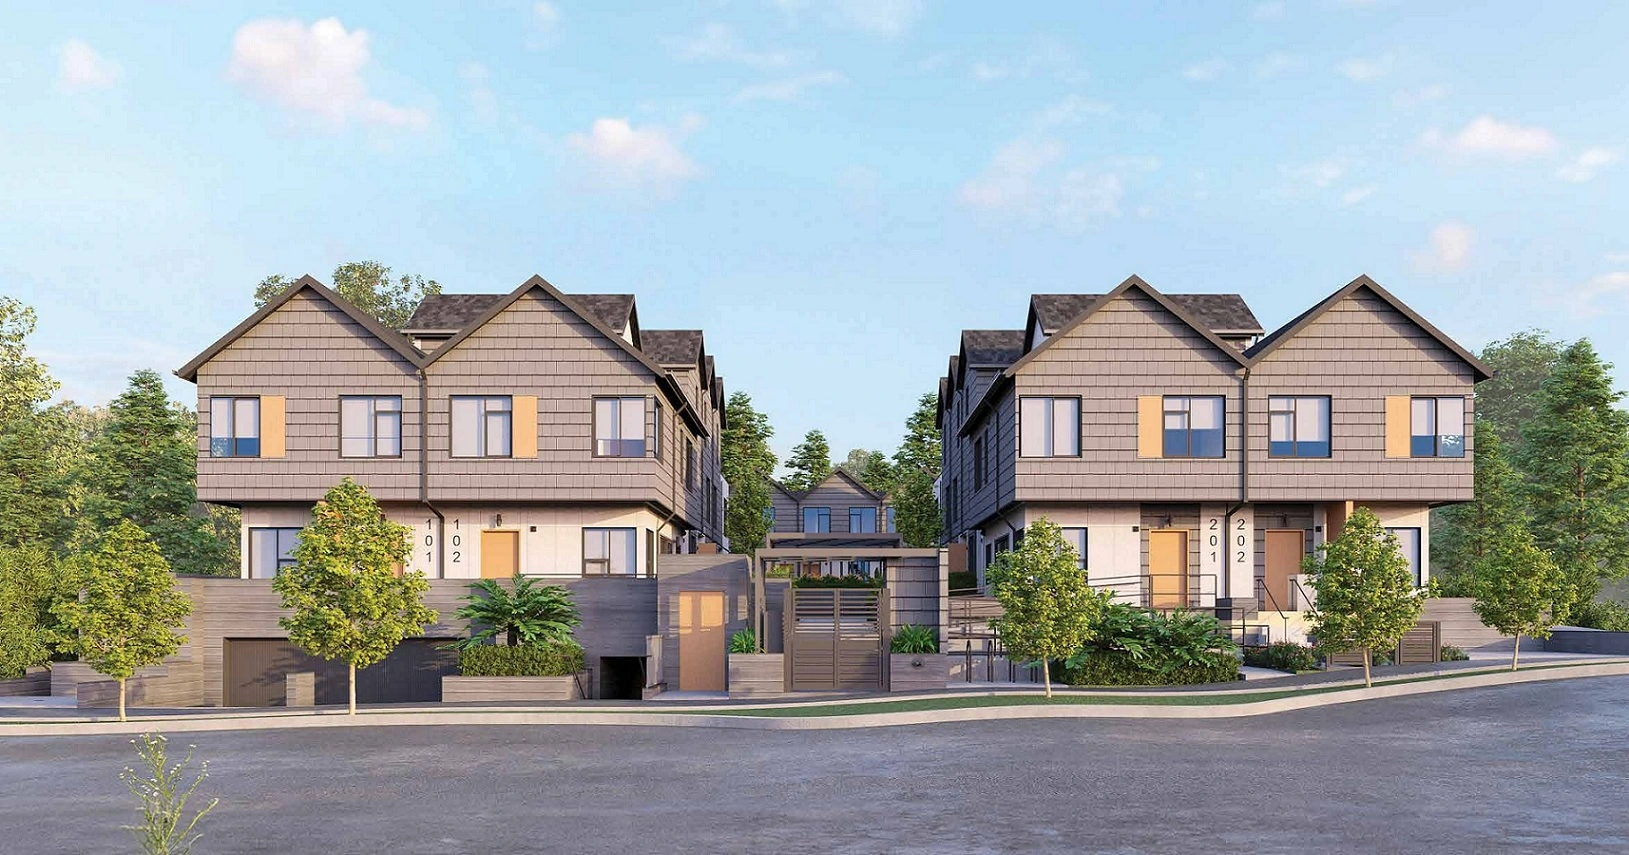 The Idyllic by Eunoia Homes is a 21-unit Burnaby townhome development.